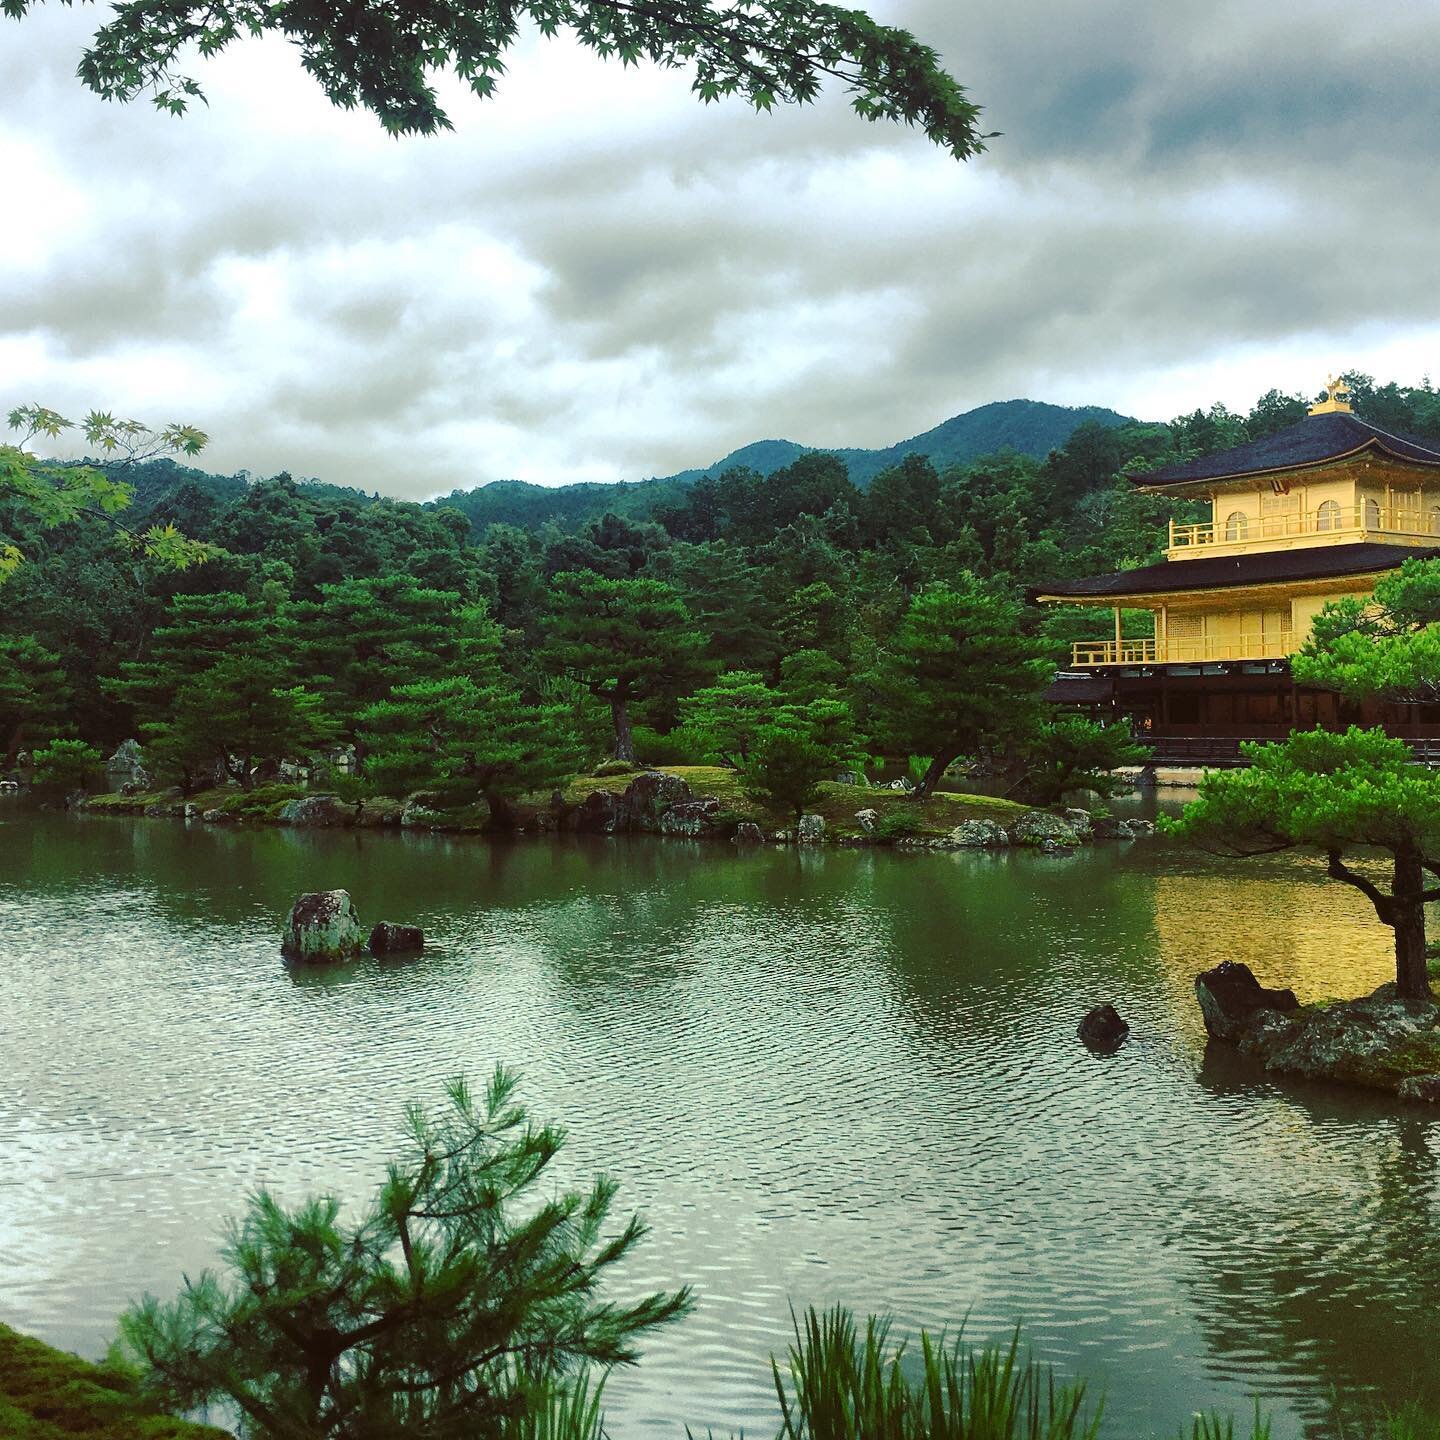 Konkaku-ji the Zen Buddhist temple in Kyoto, Japan. The top two floors are covered in gold leaf! #yetiadventure